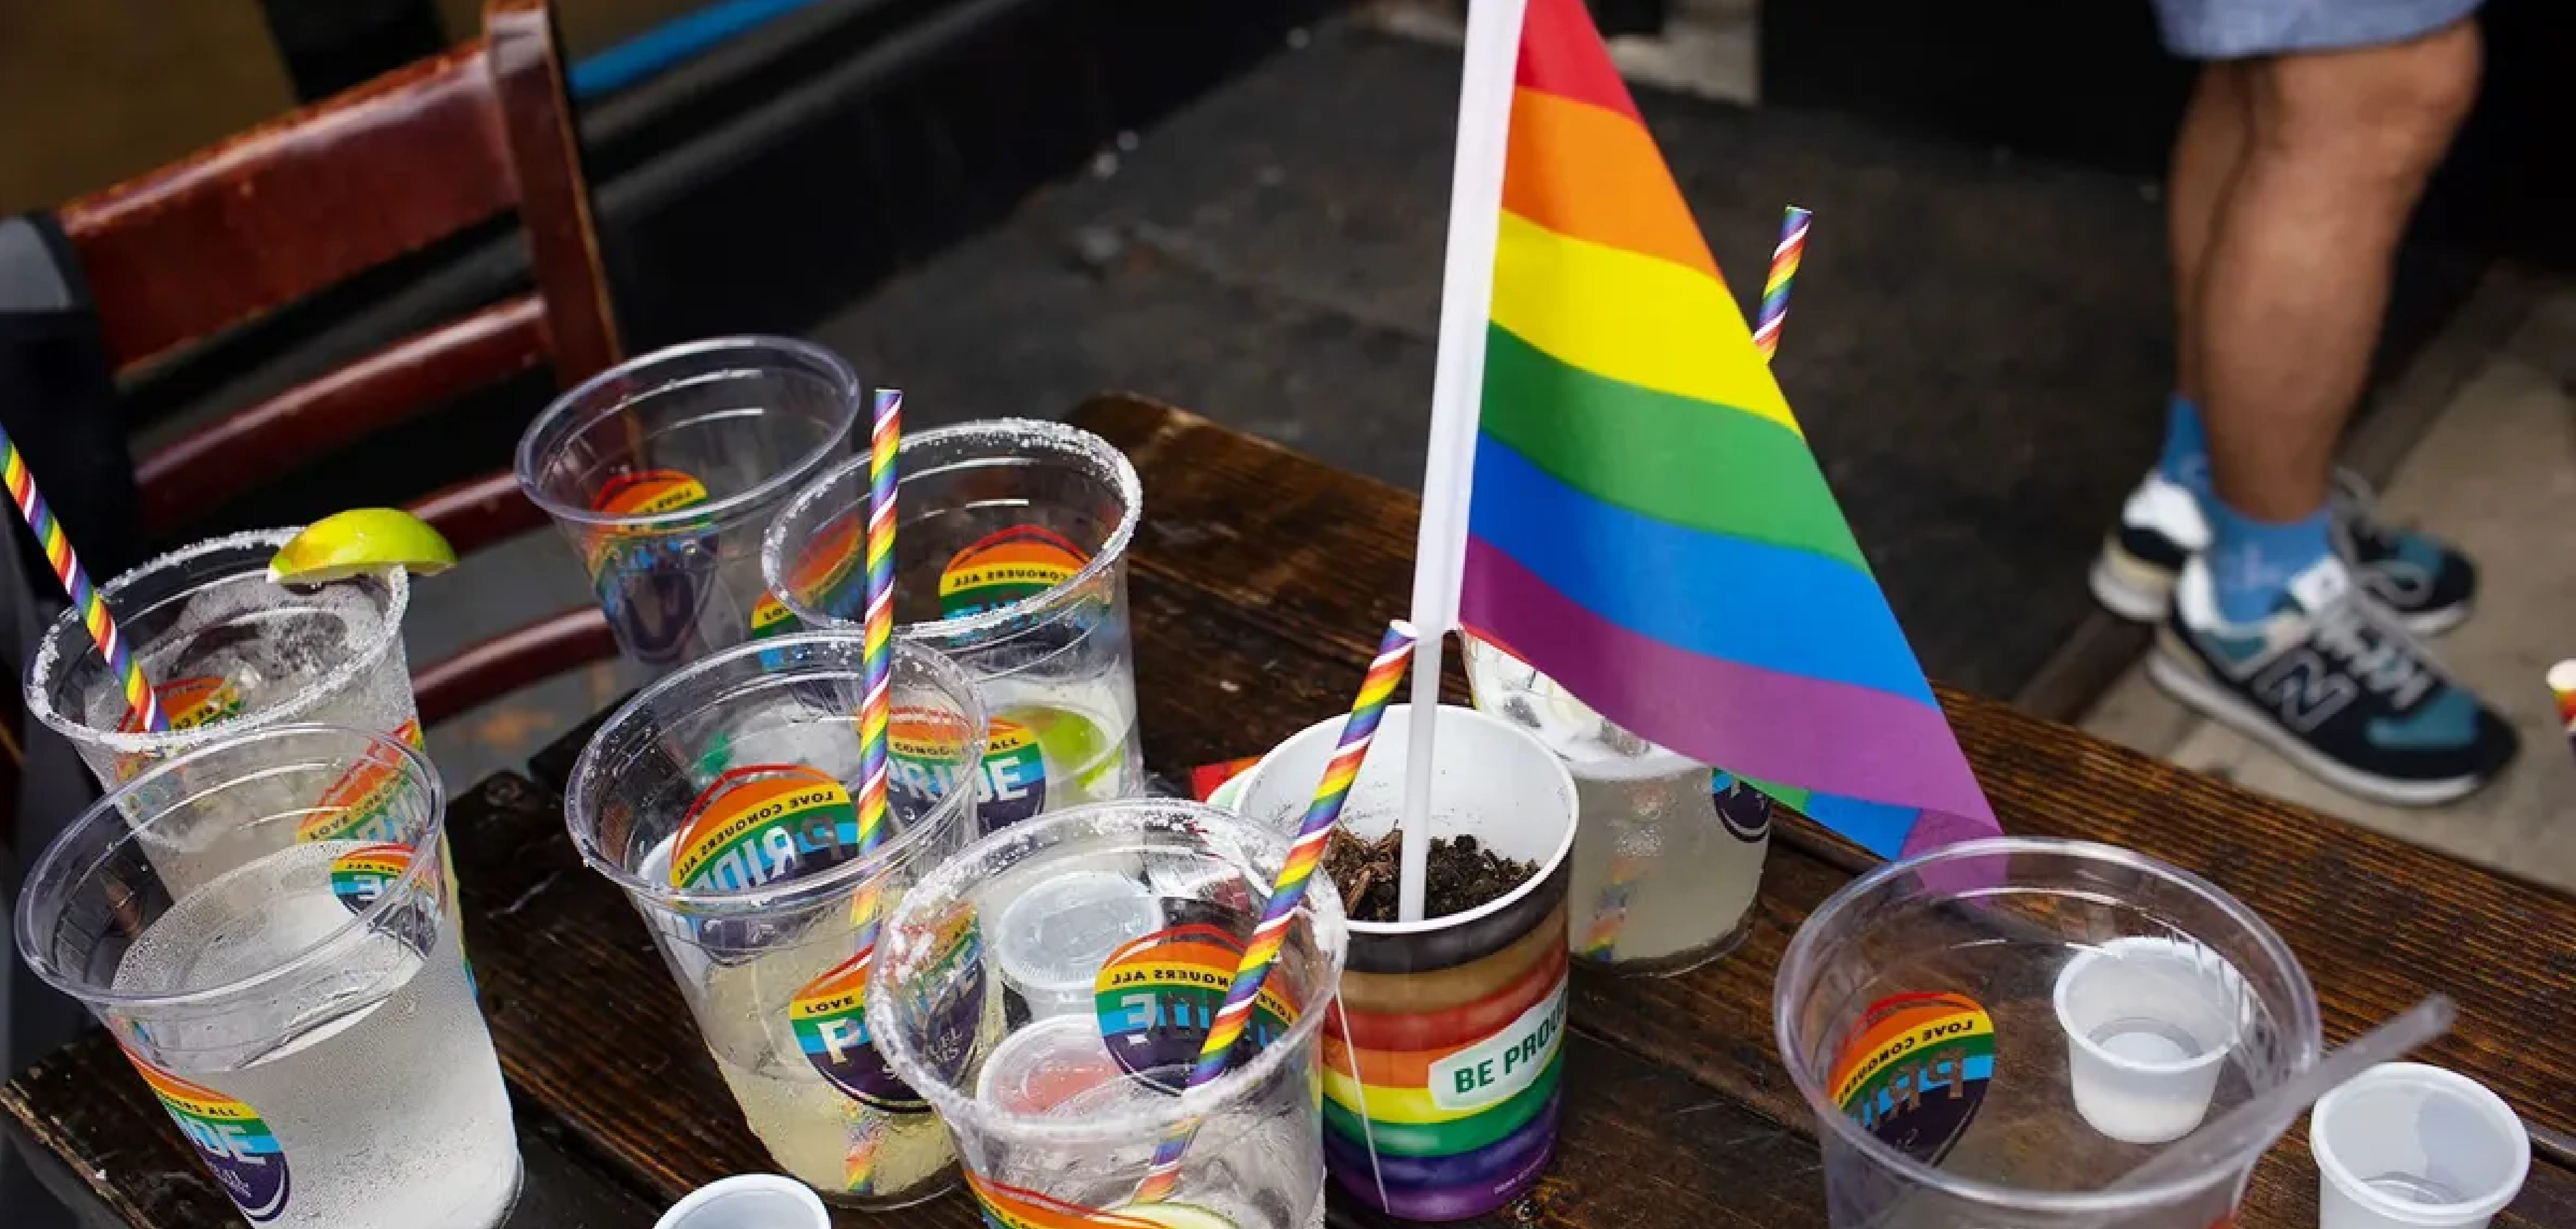 A table with plastic cups that have stickers on them that say "Pride." One of the cups has a rainbow flag in it.